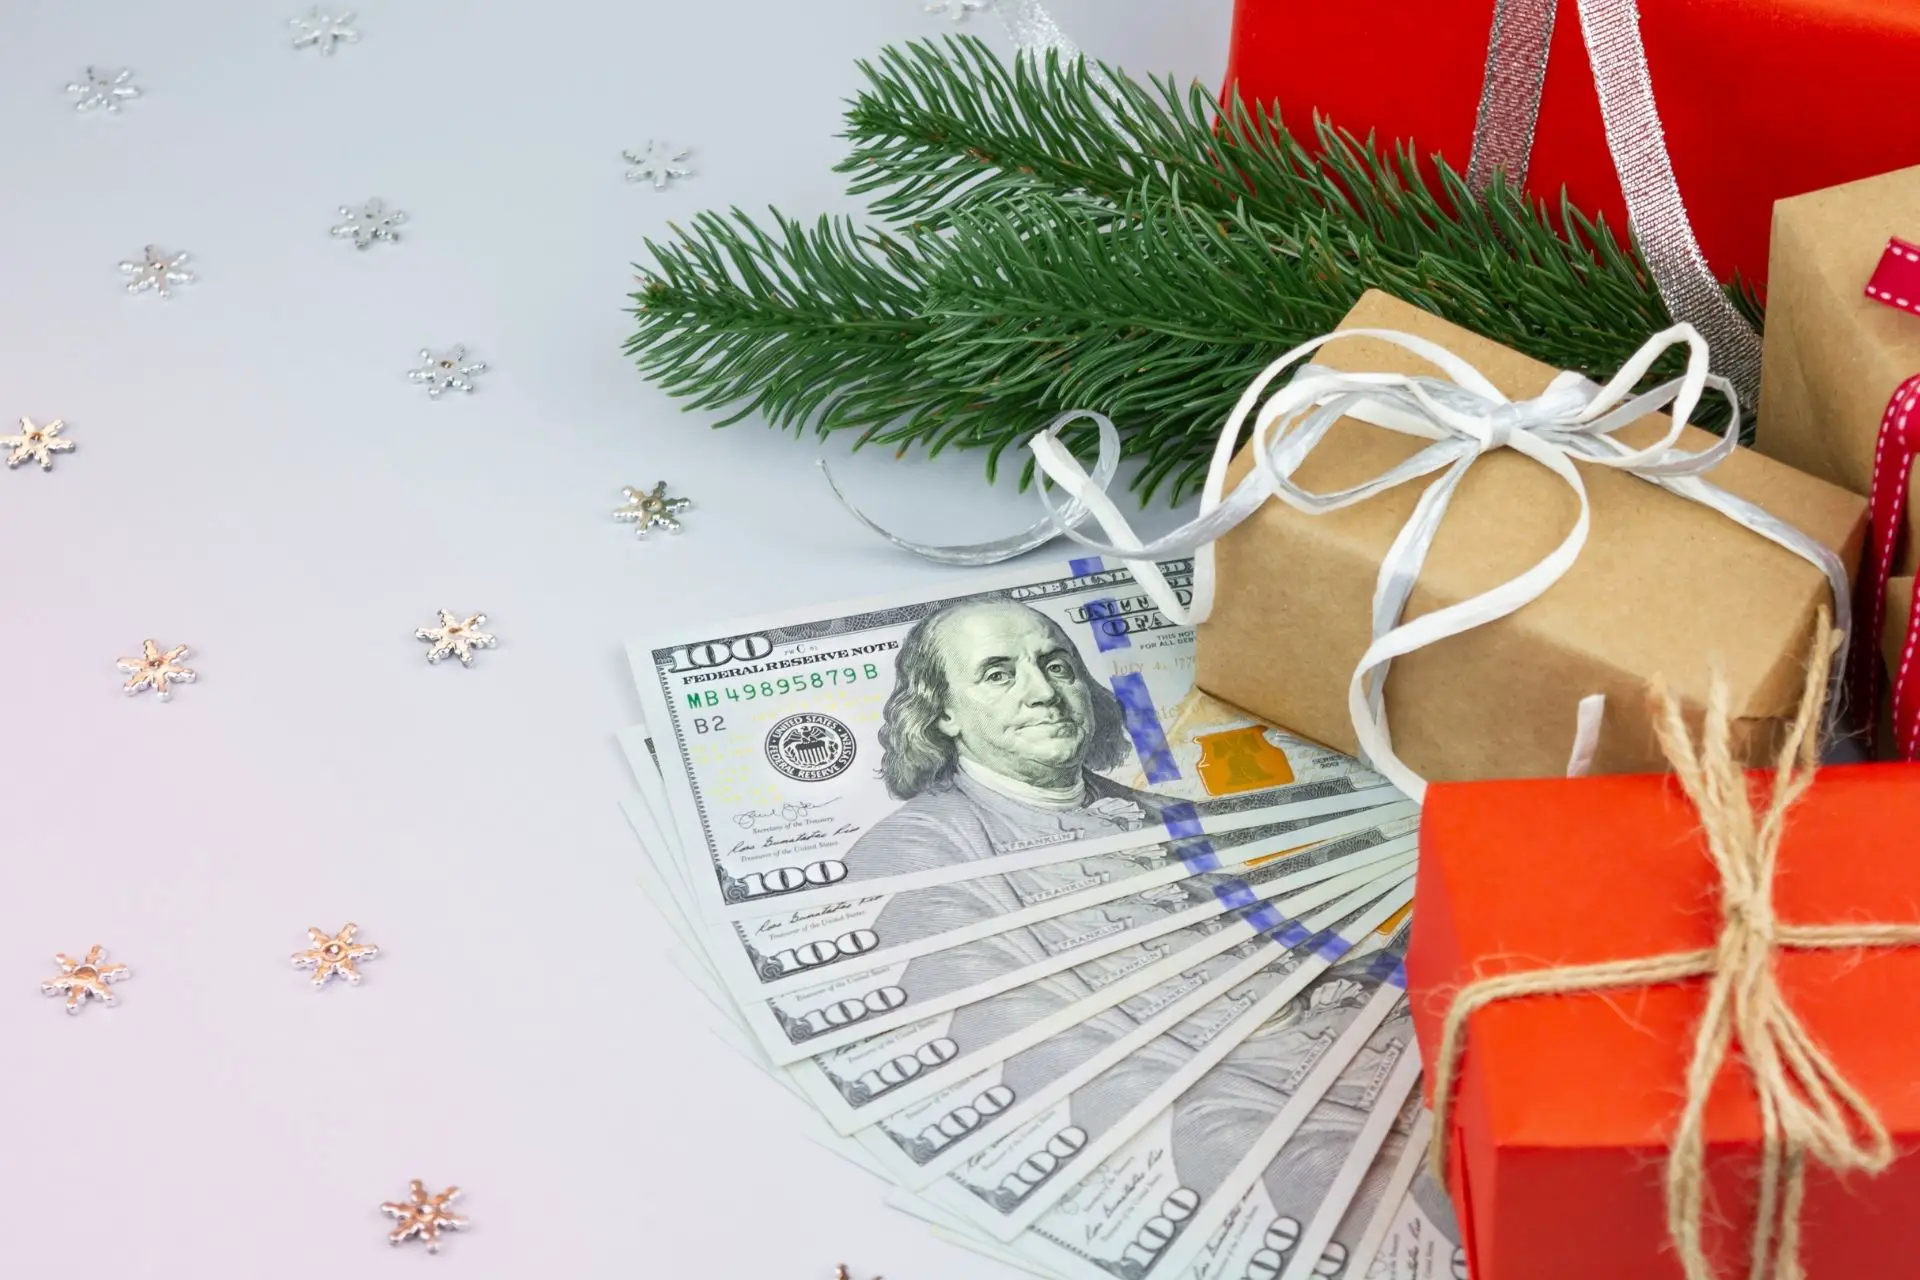 Easy ways to save money during the holidays 10 Money saving tips